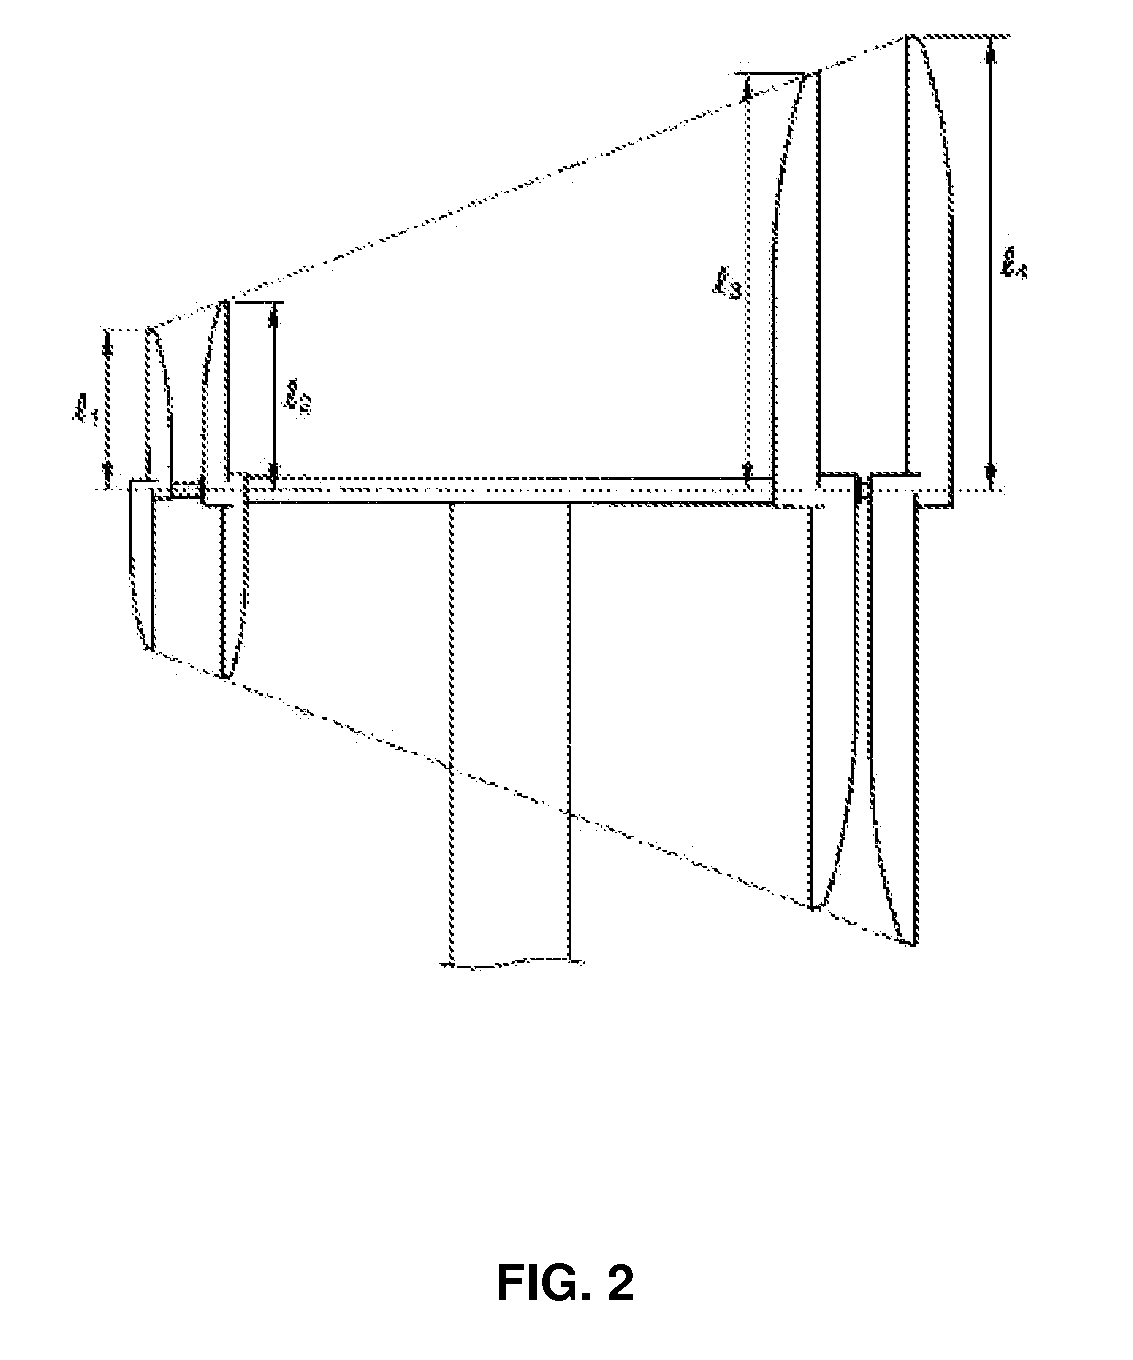 Windmill-type electric generation system